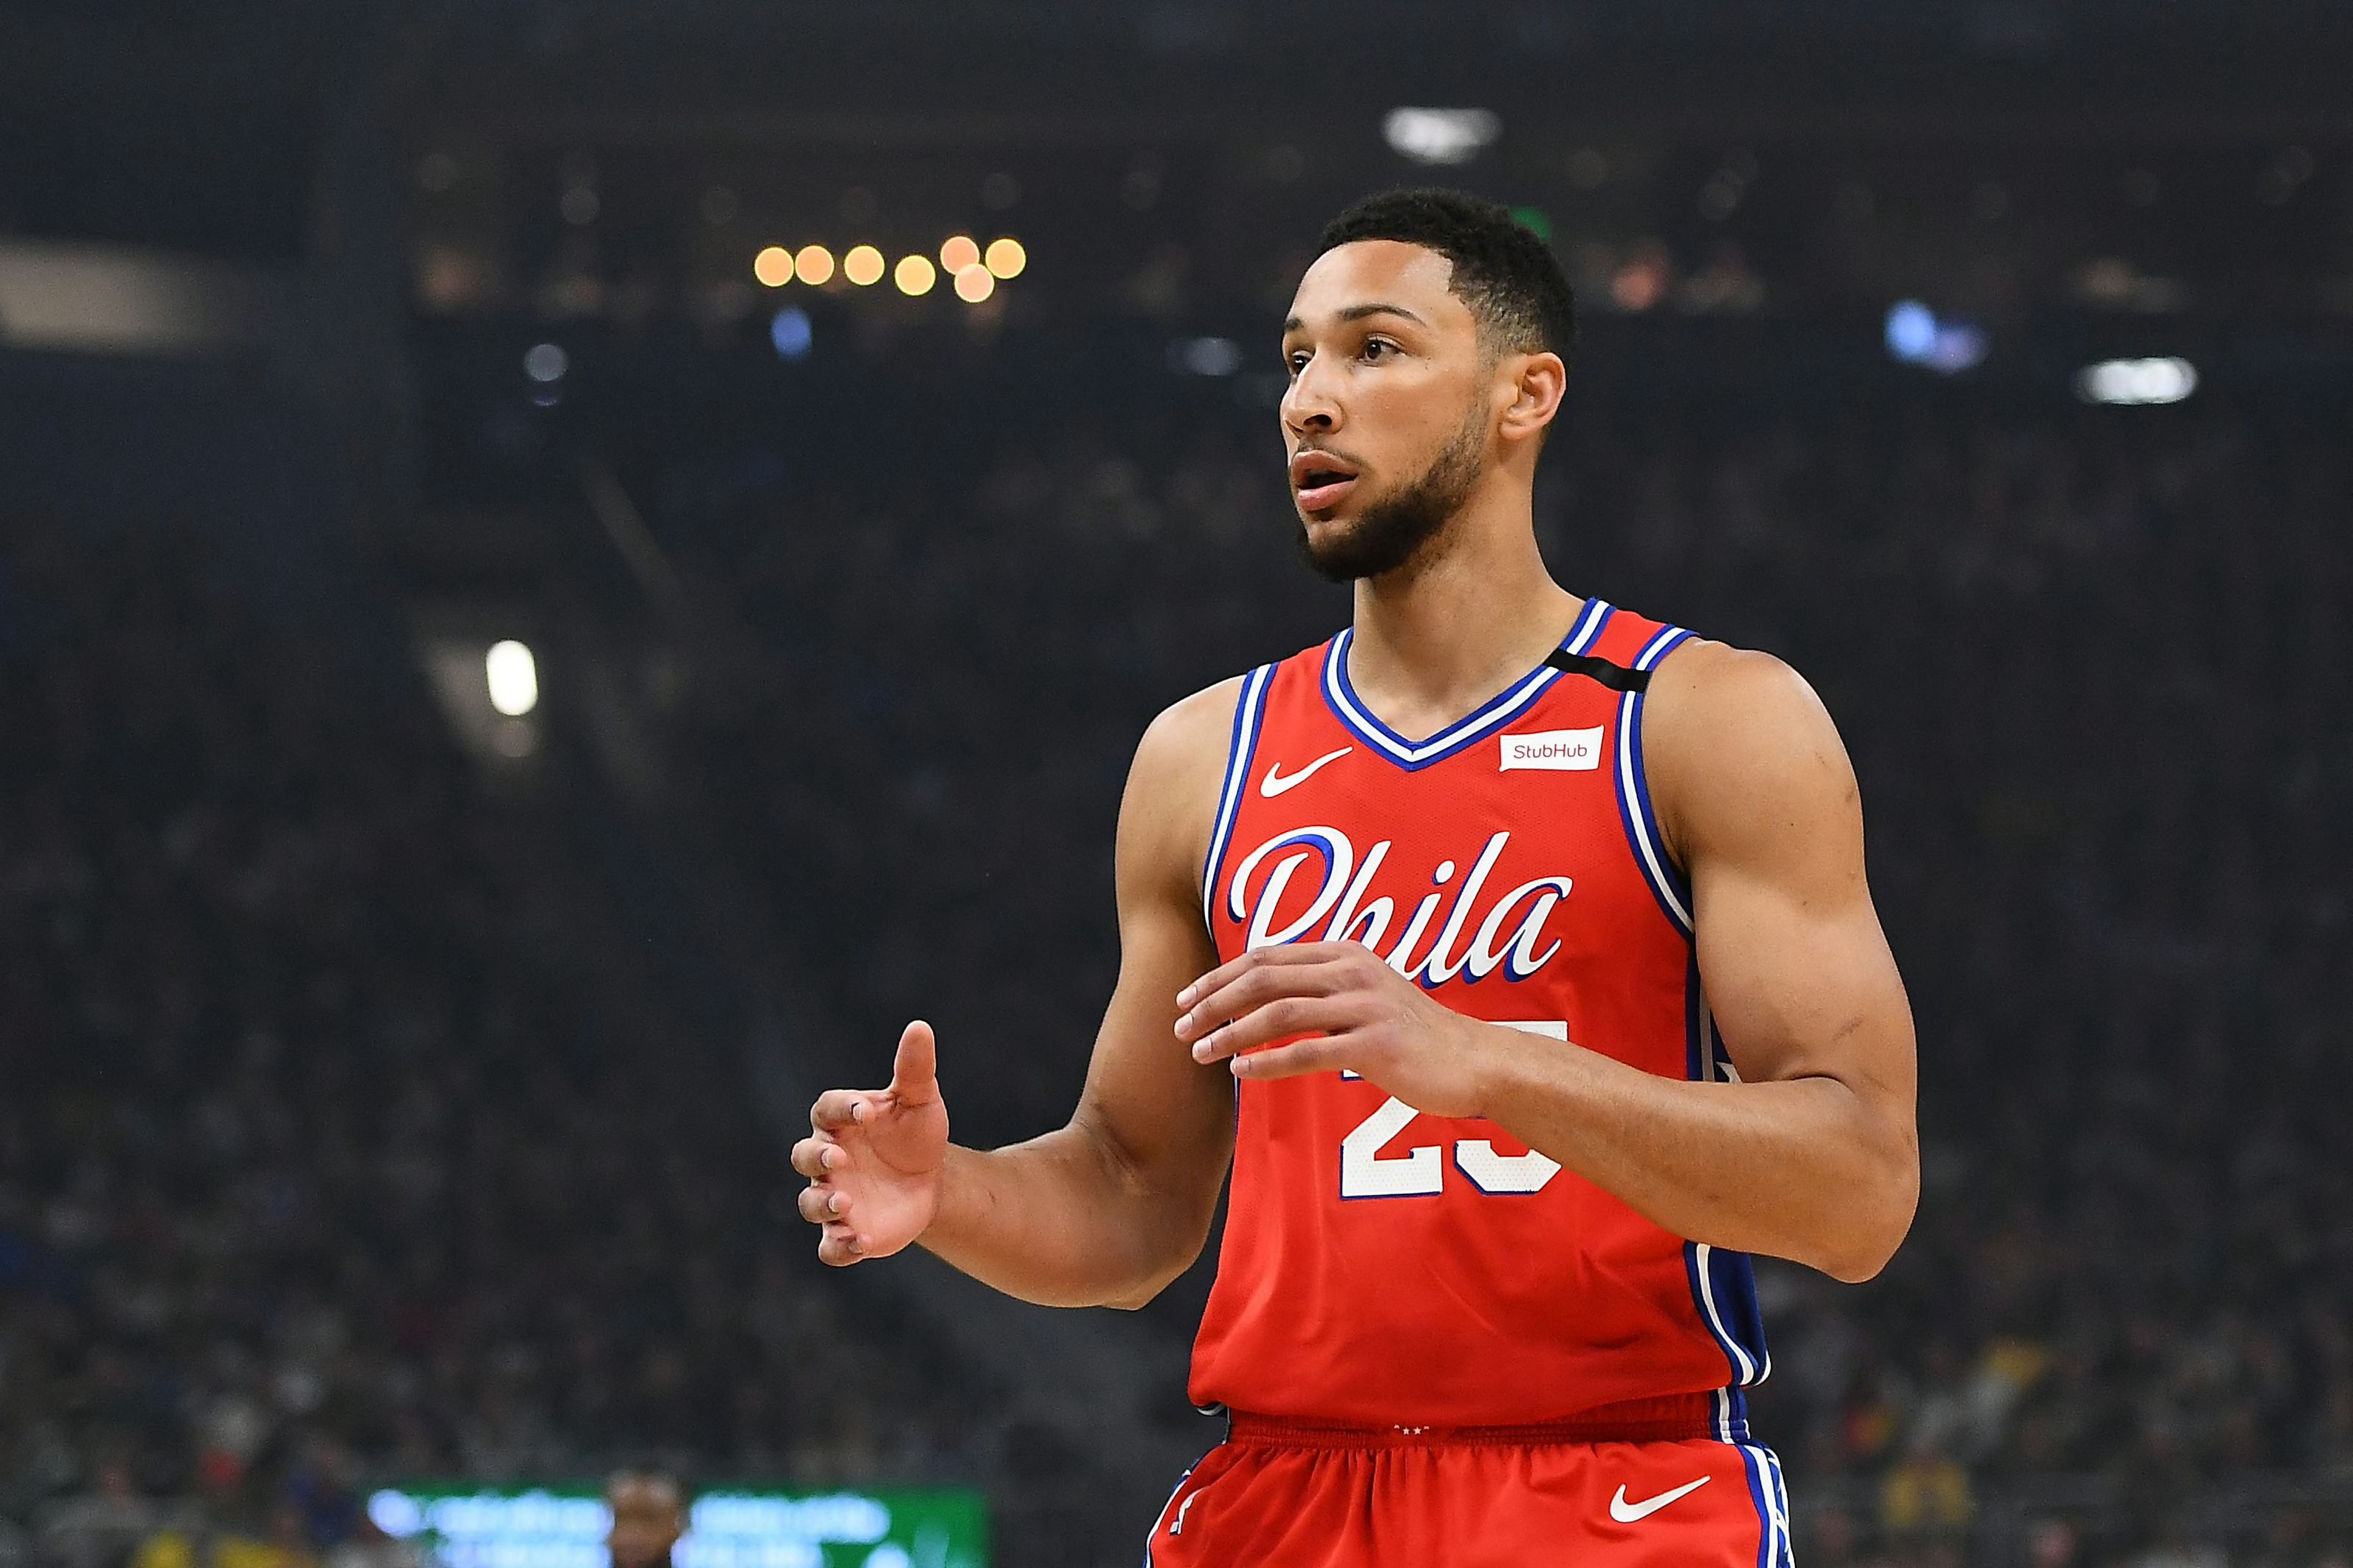 Ben Simmons trade: Ben Simmons to wear jersey number 10 for